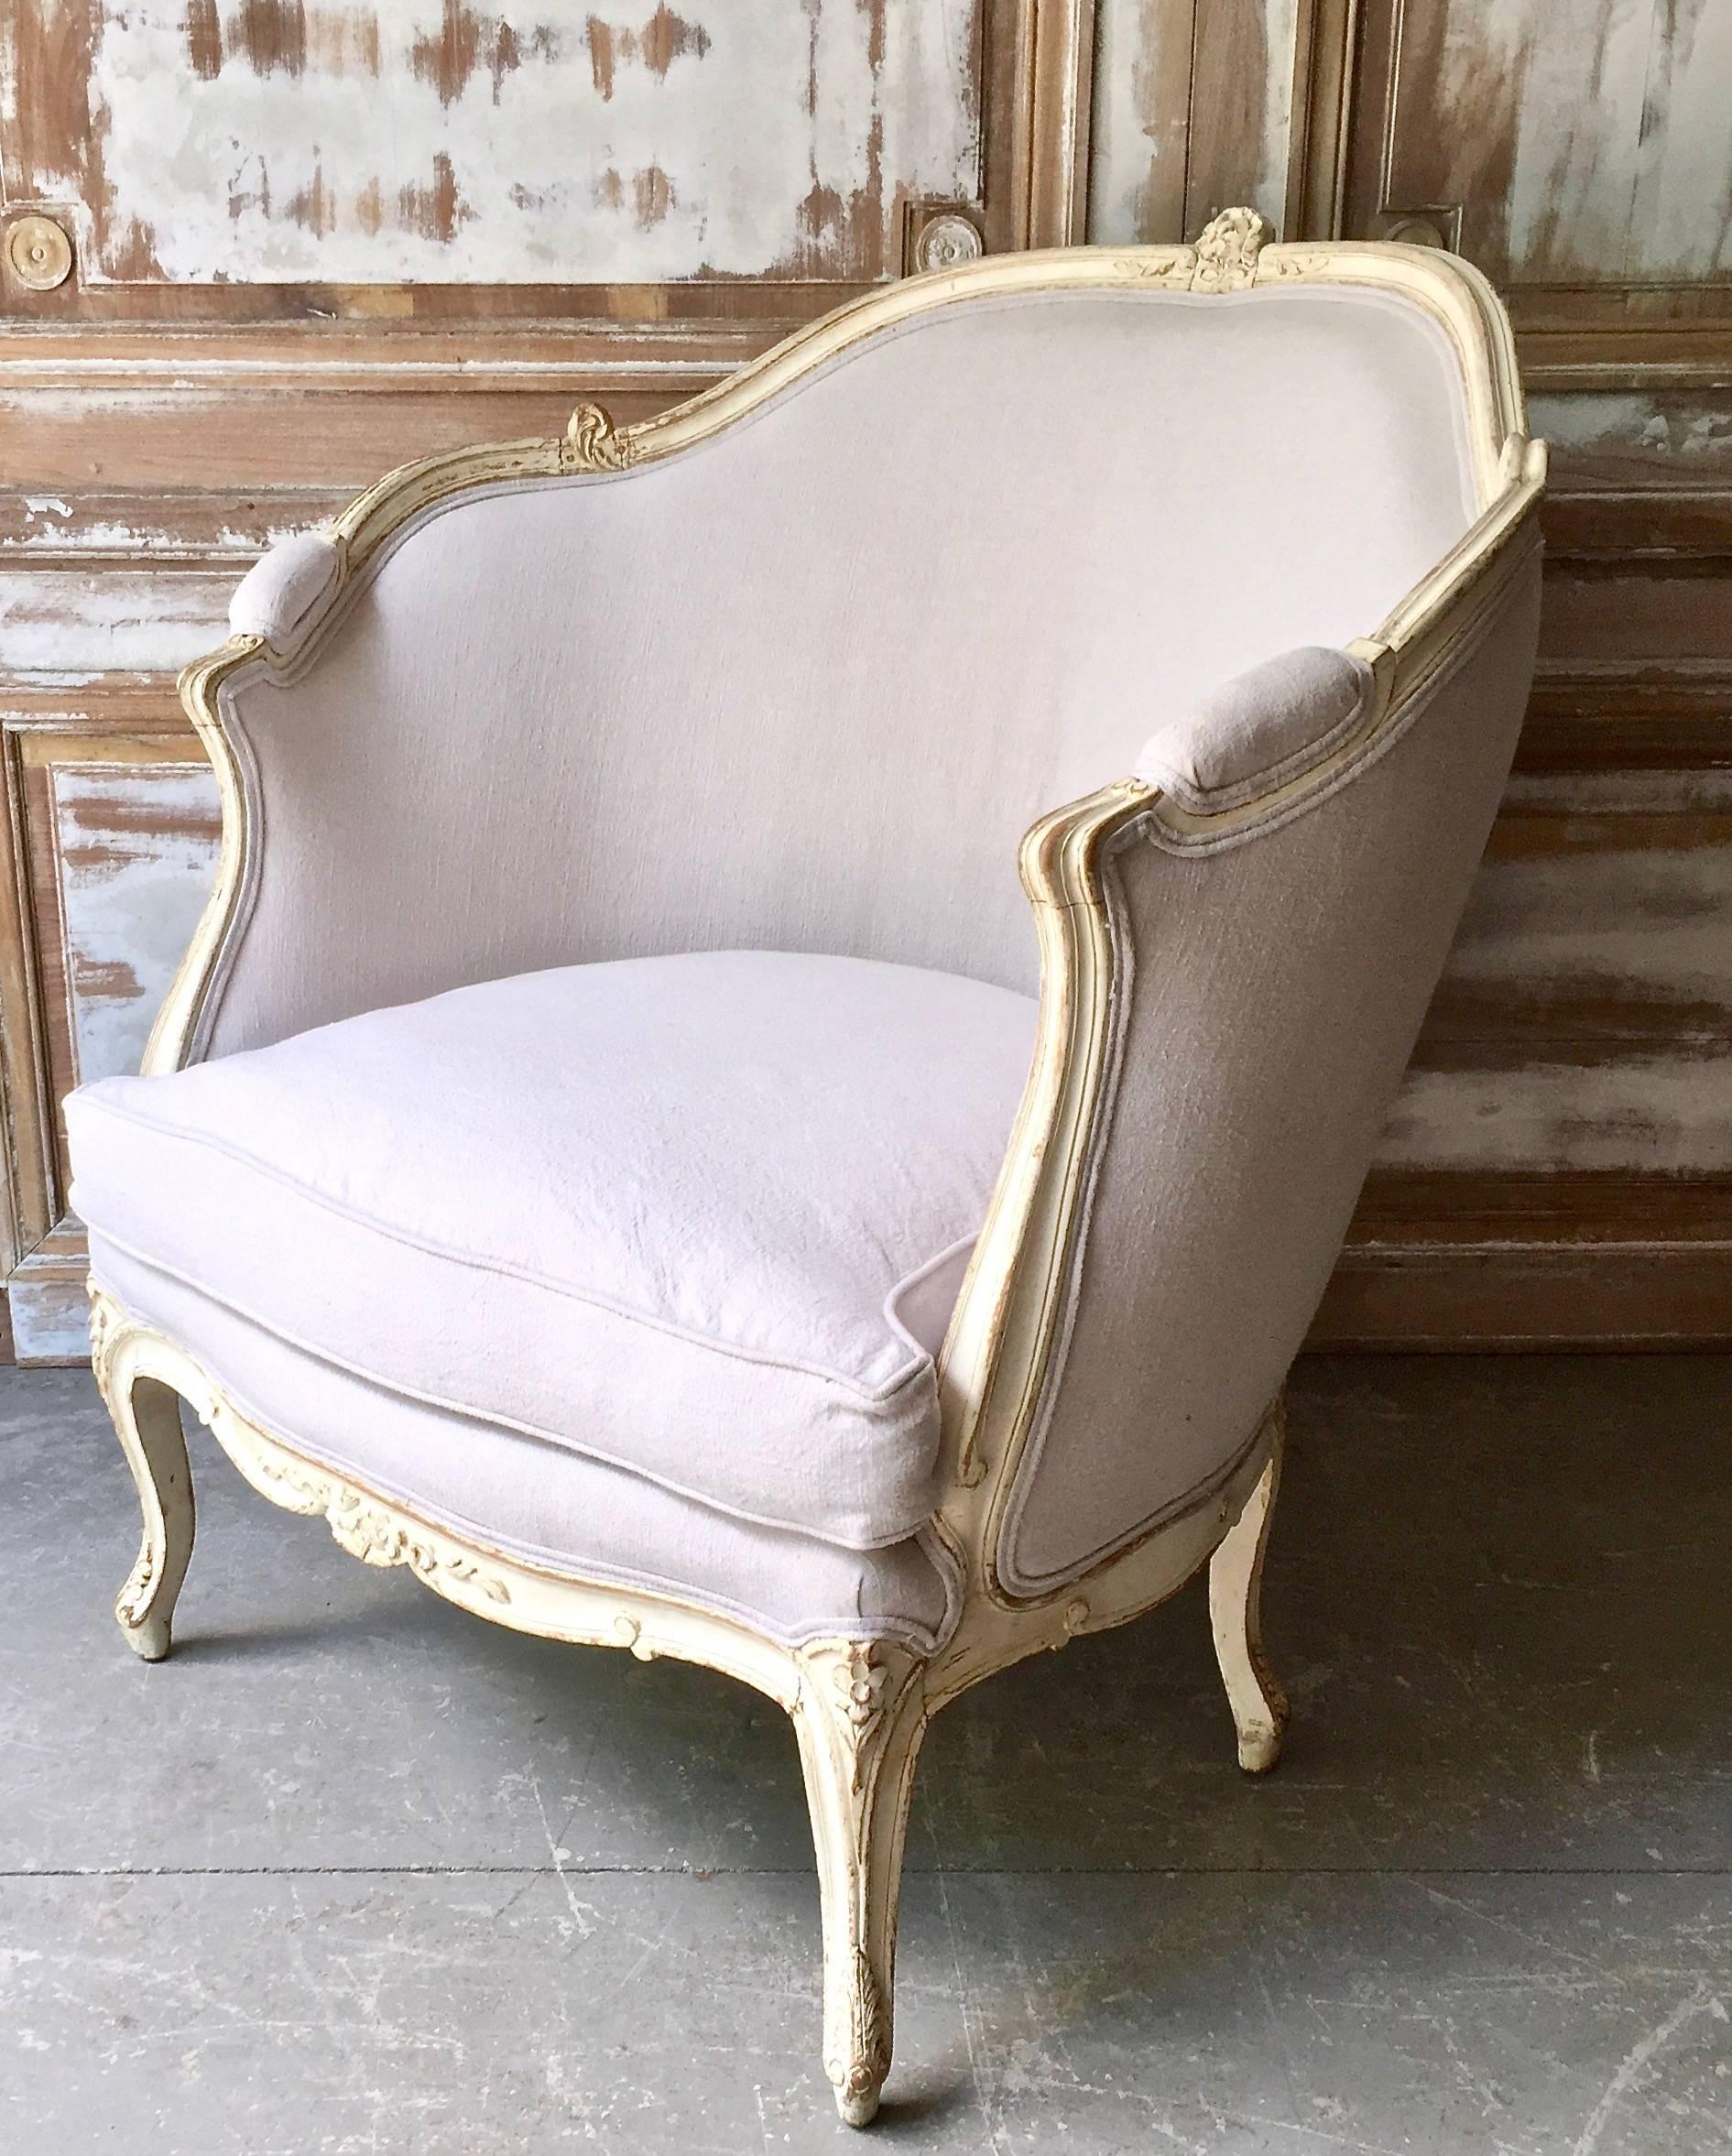 19th century French very wide and rare Bergère, Louis XV style, called Marquise or Demi Canapé with coved back which sweep without a break in to the armrests. Richly carved back and seat rails on elecant cabriole legs with flower